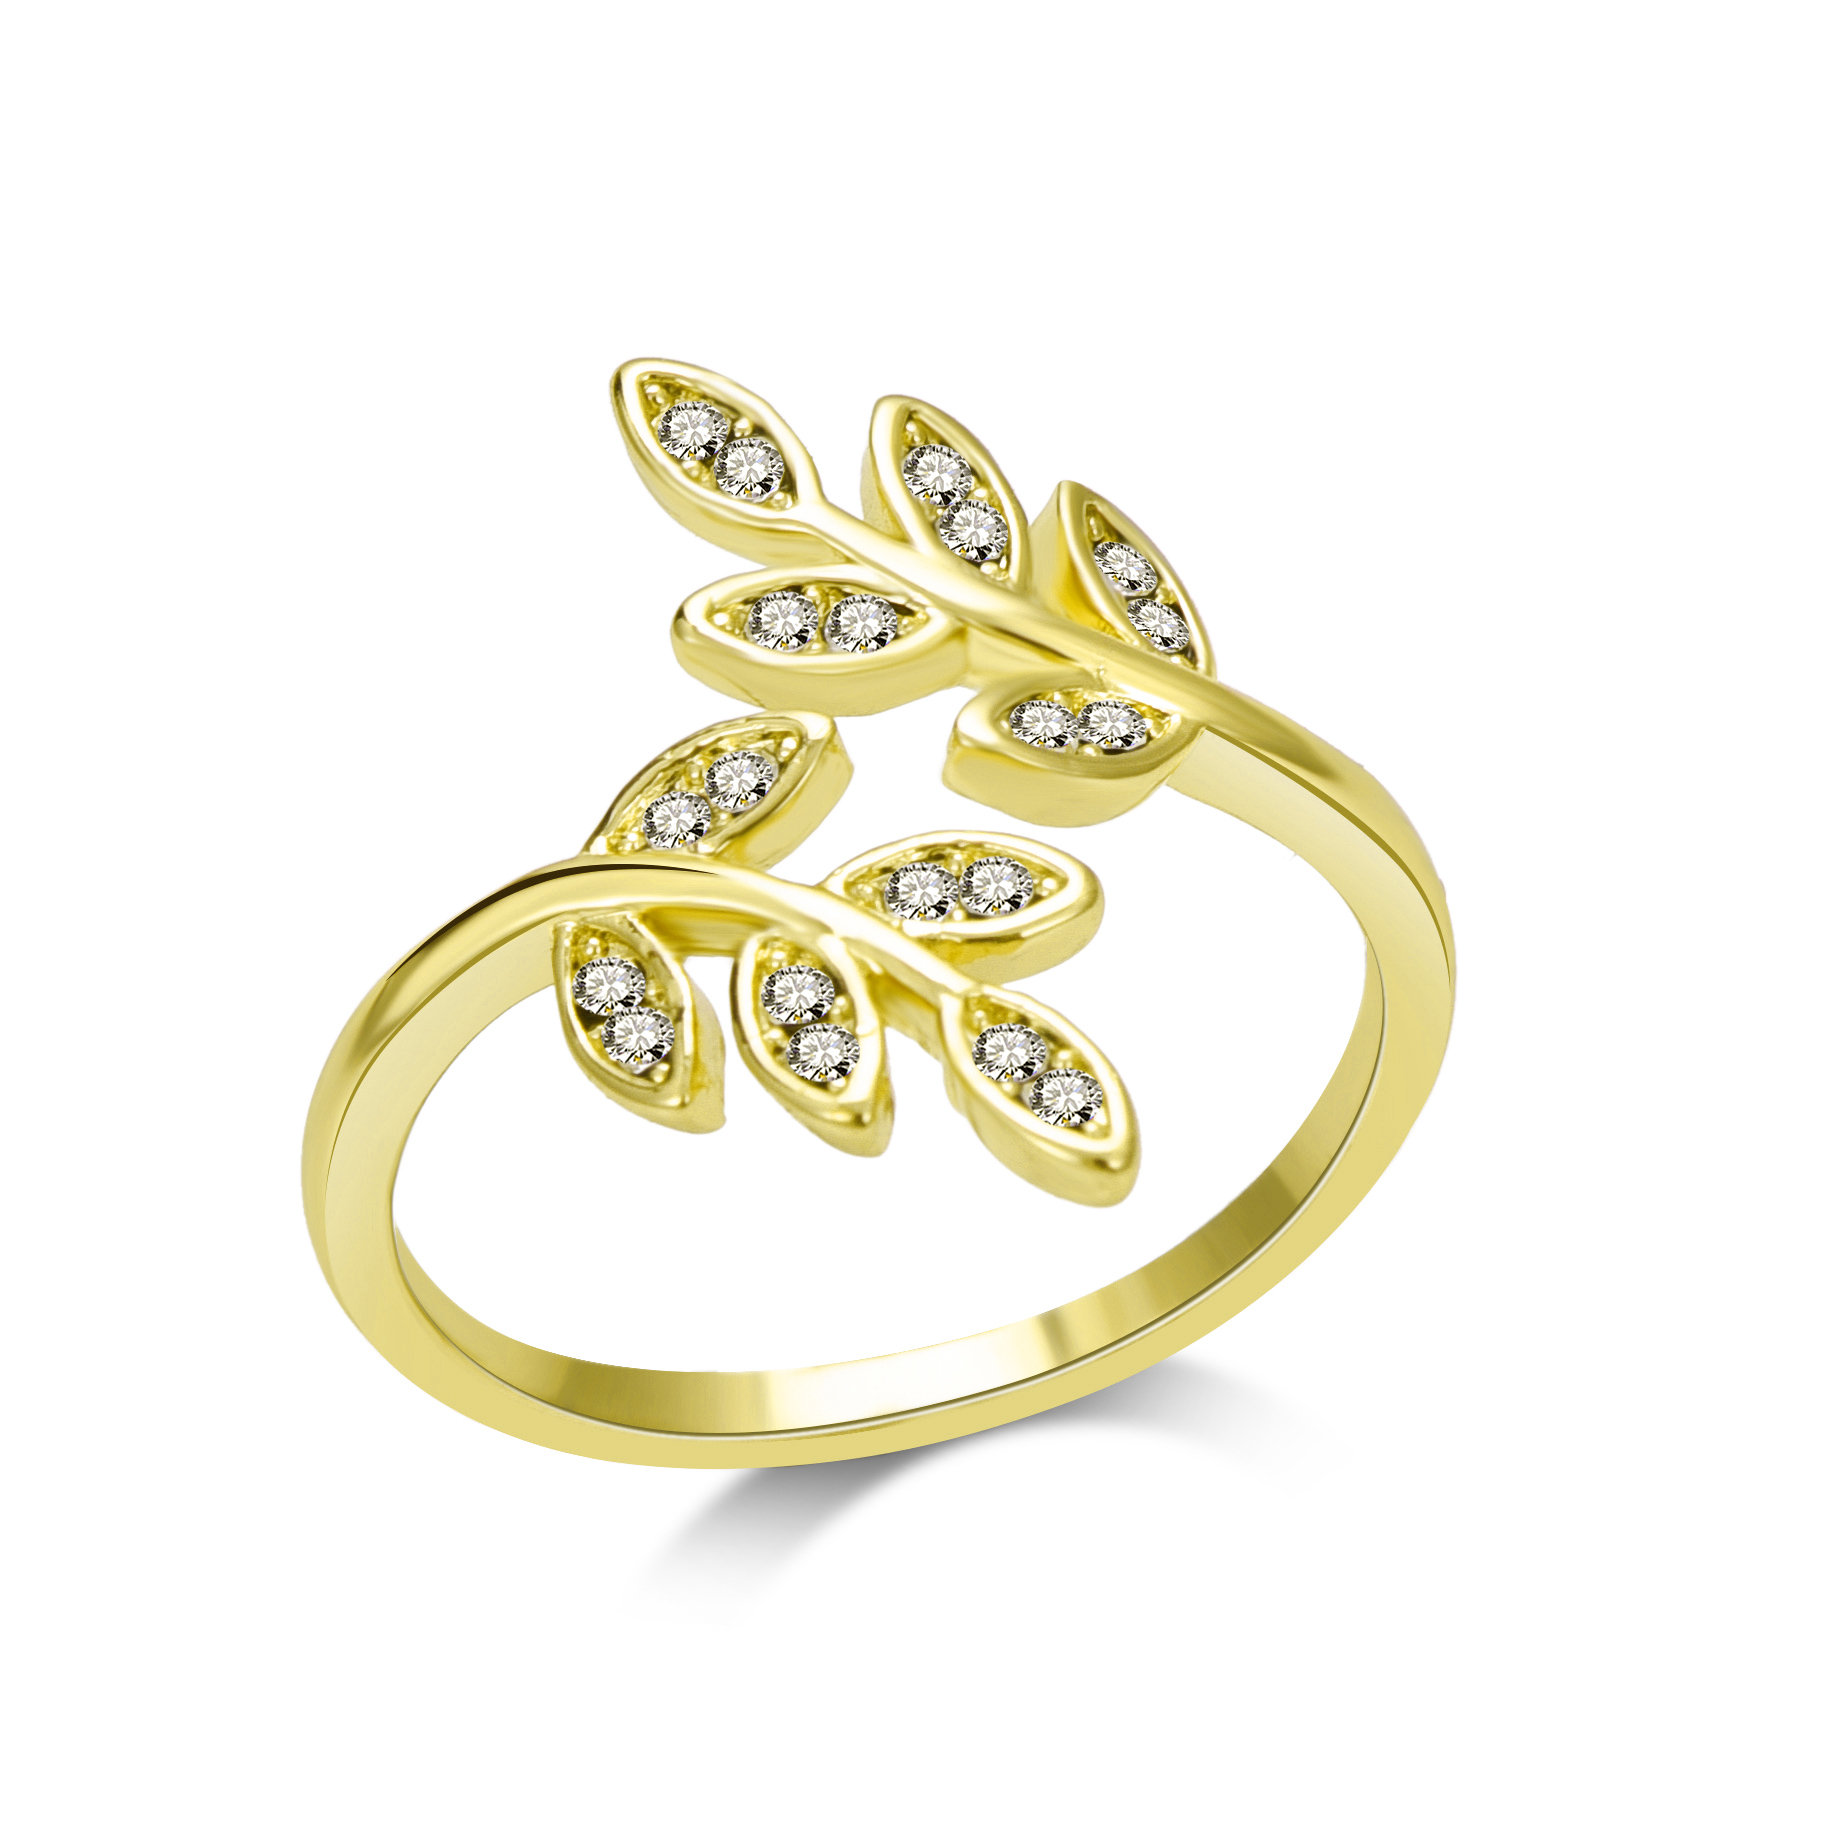 Gold Plated Adjustable Leaf Ring Created with Zircondia® Crystals by Philip Jones Jewellery